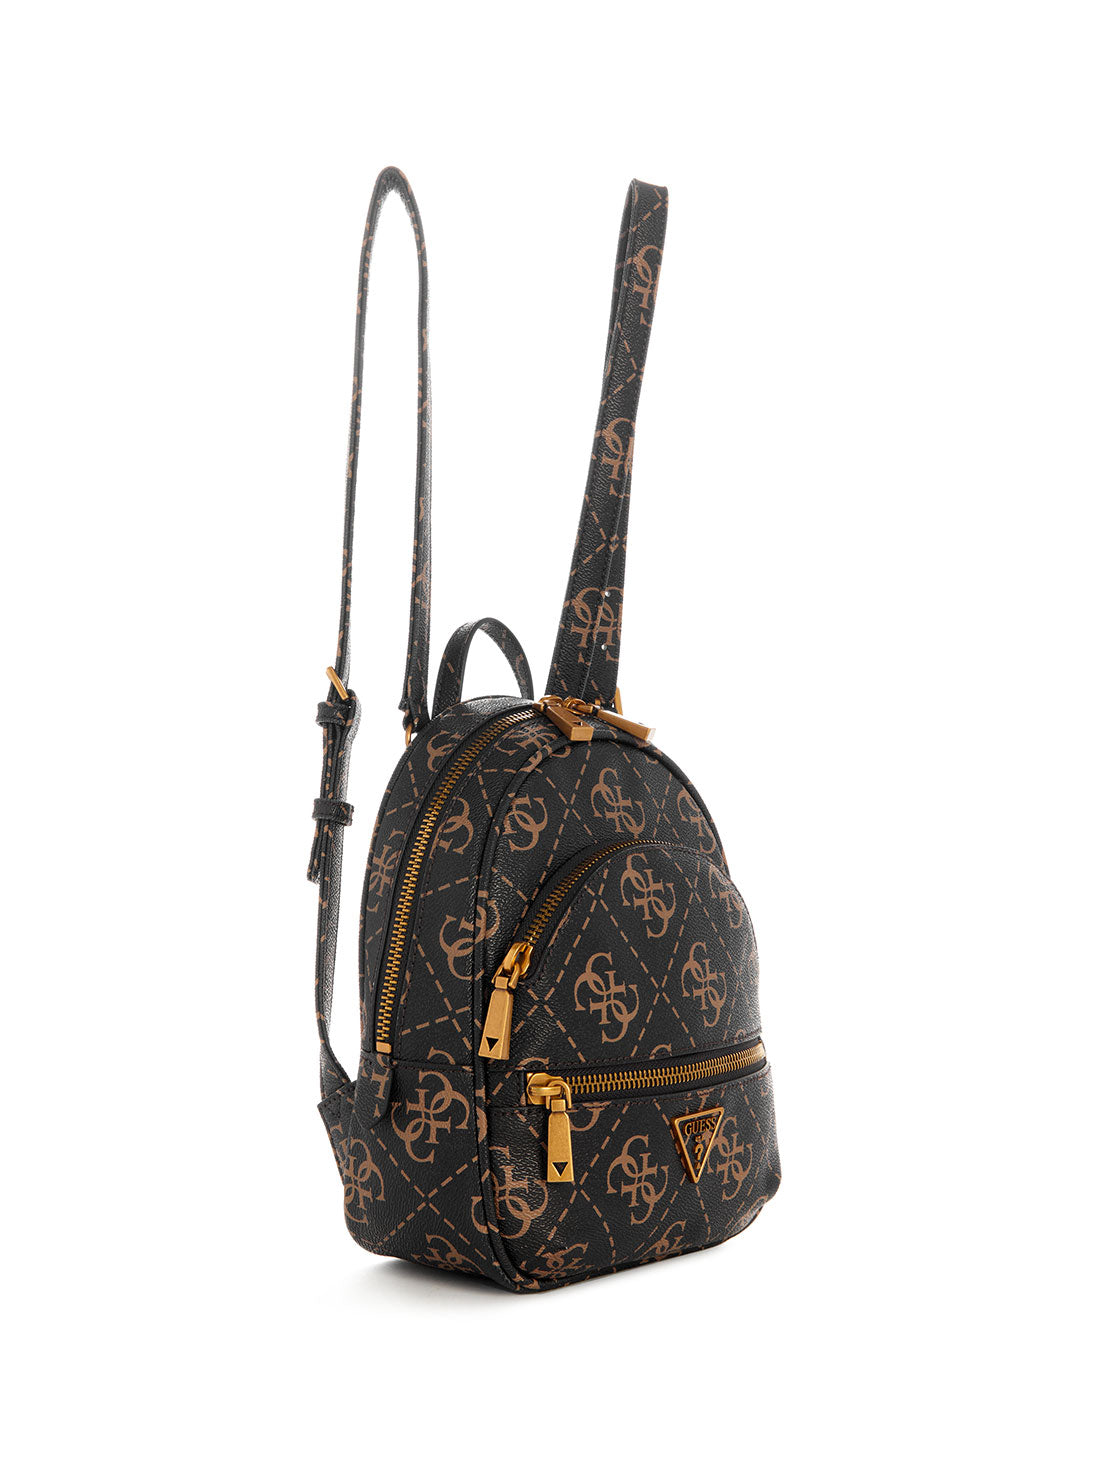 GUESS Women's Brown Logo Manhattan Backpack SL699432 Front Side View